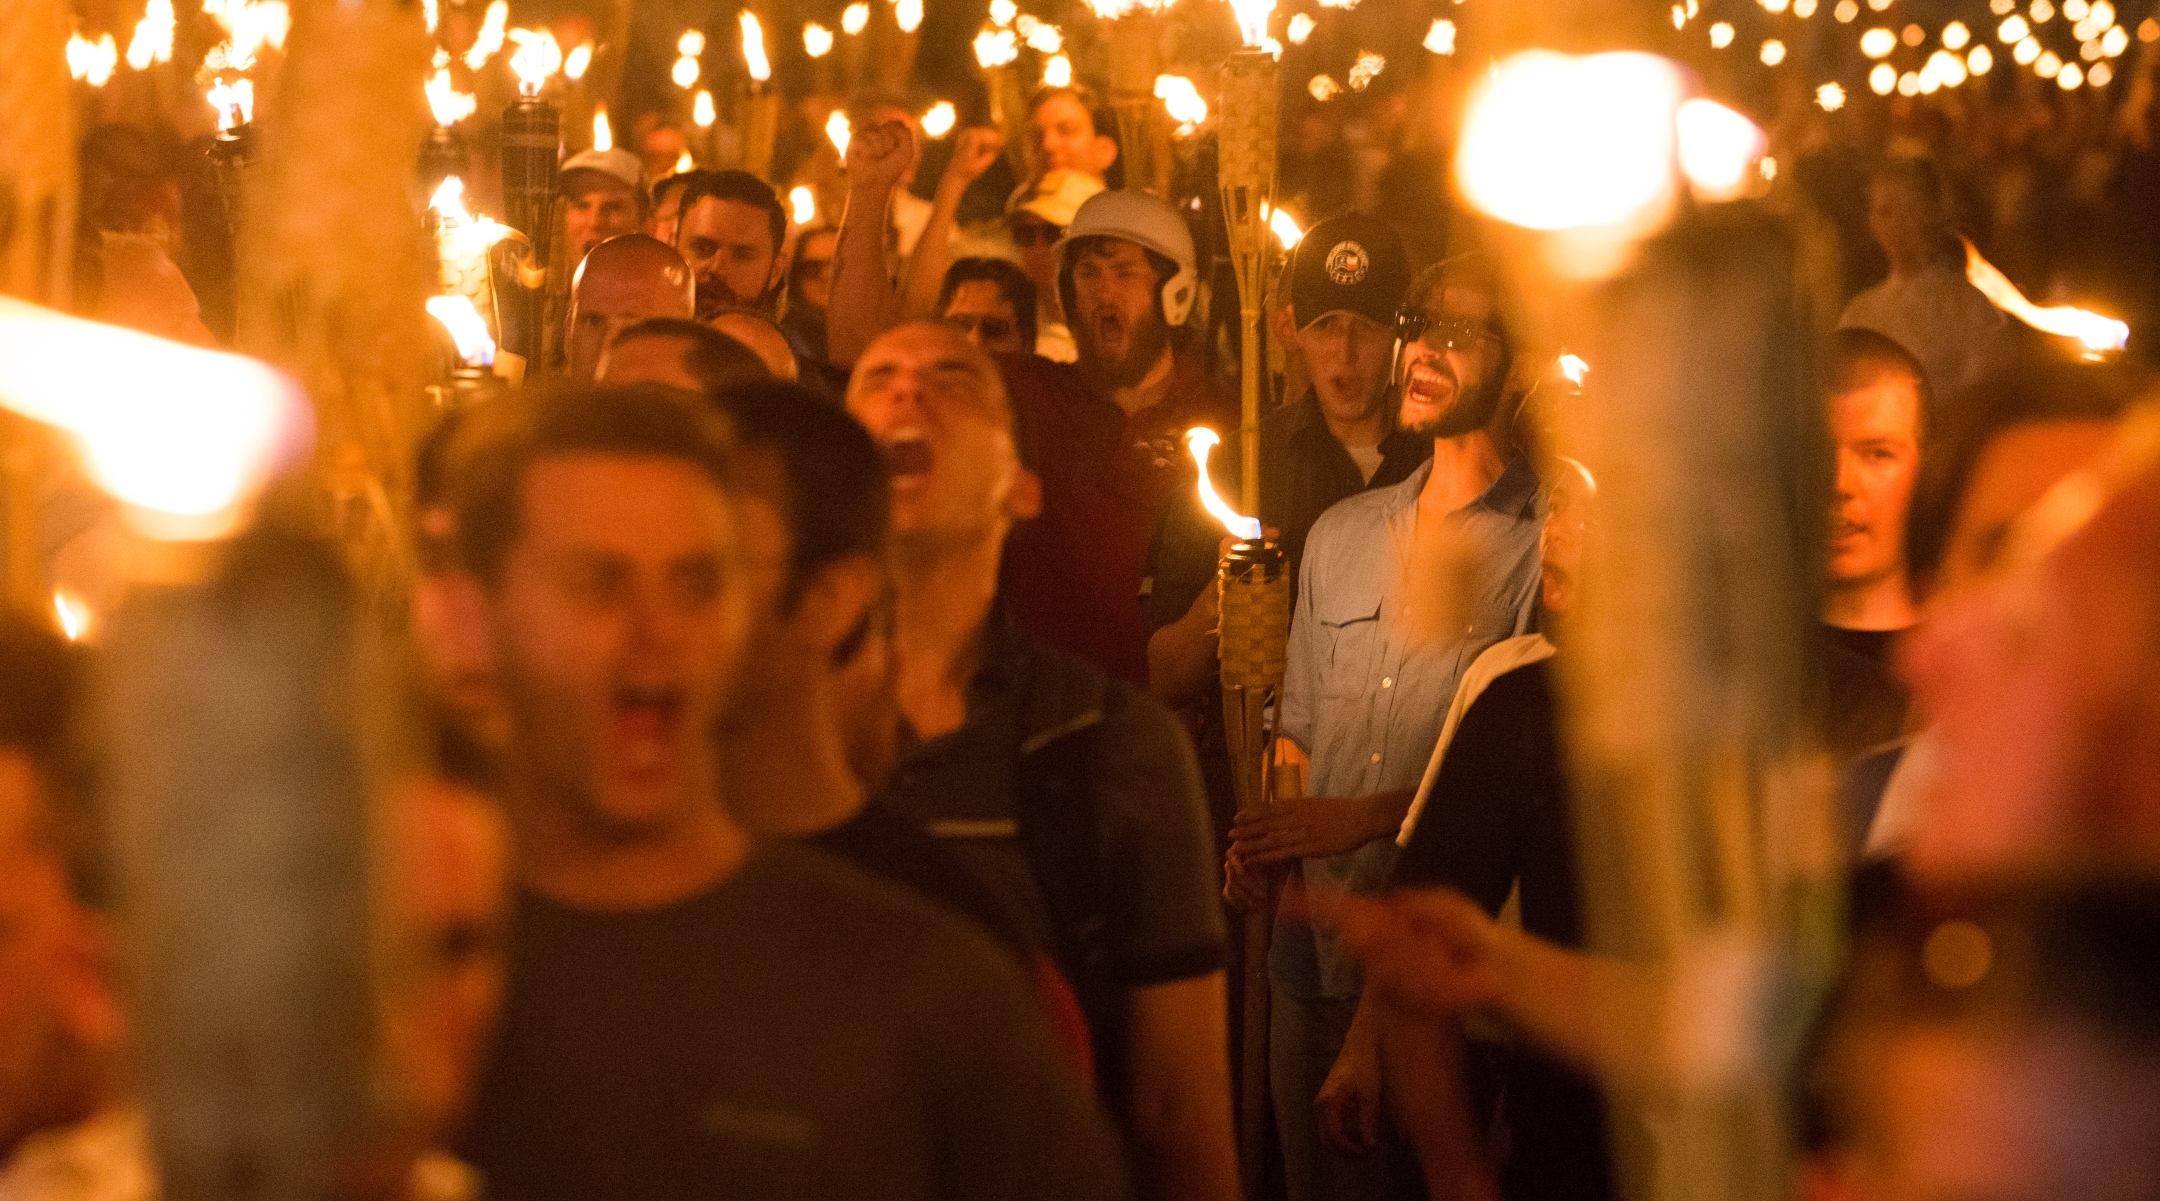 Court orders defendants in Charlottesville neo-Nazi lawsuit to pay nearly $5 million for legal costs